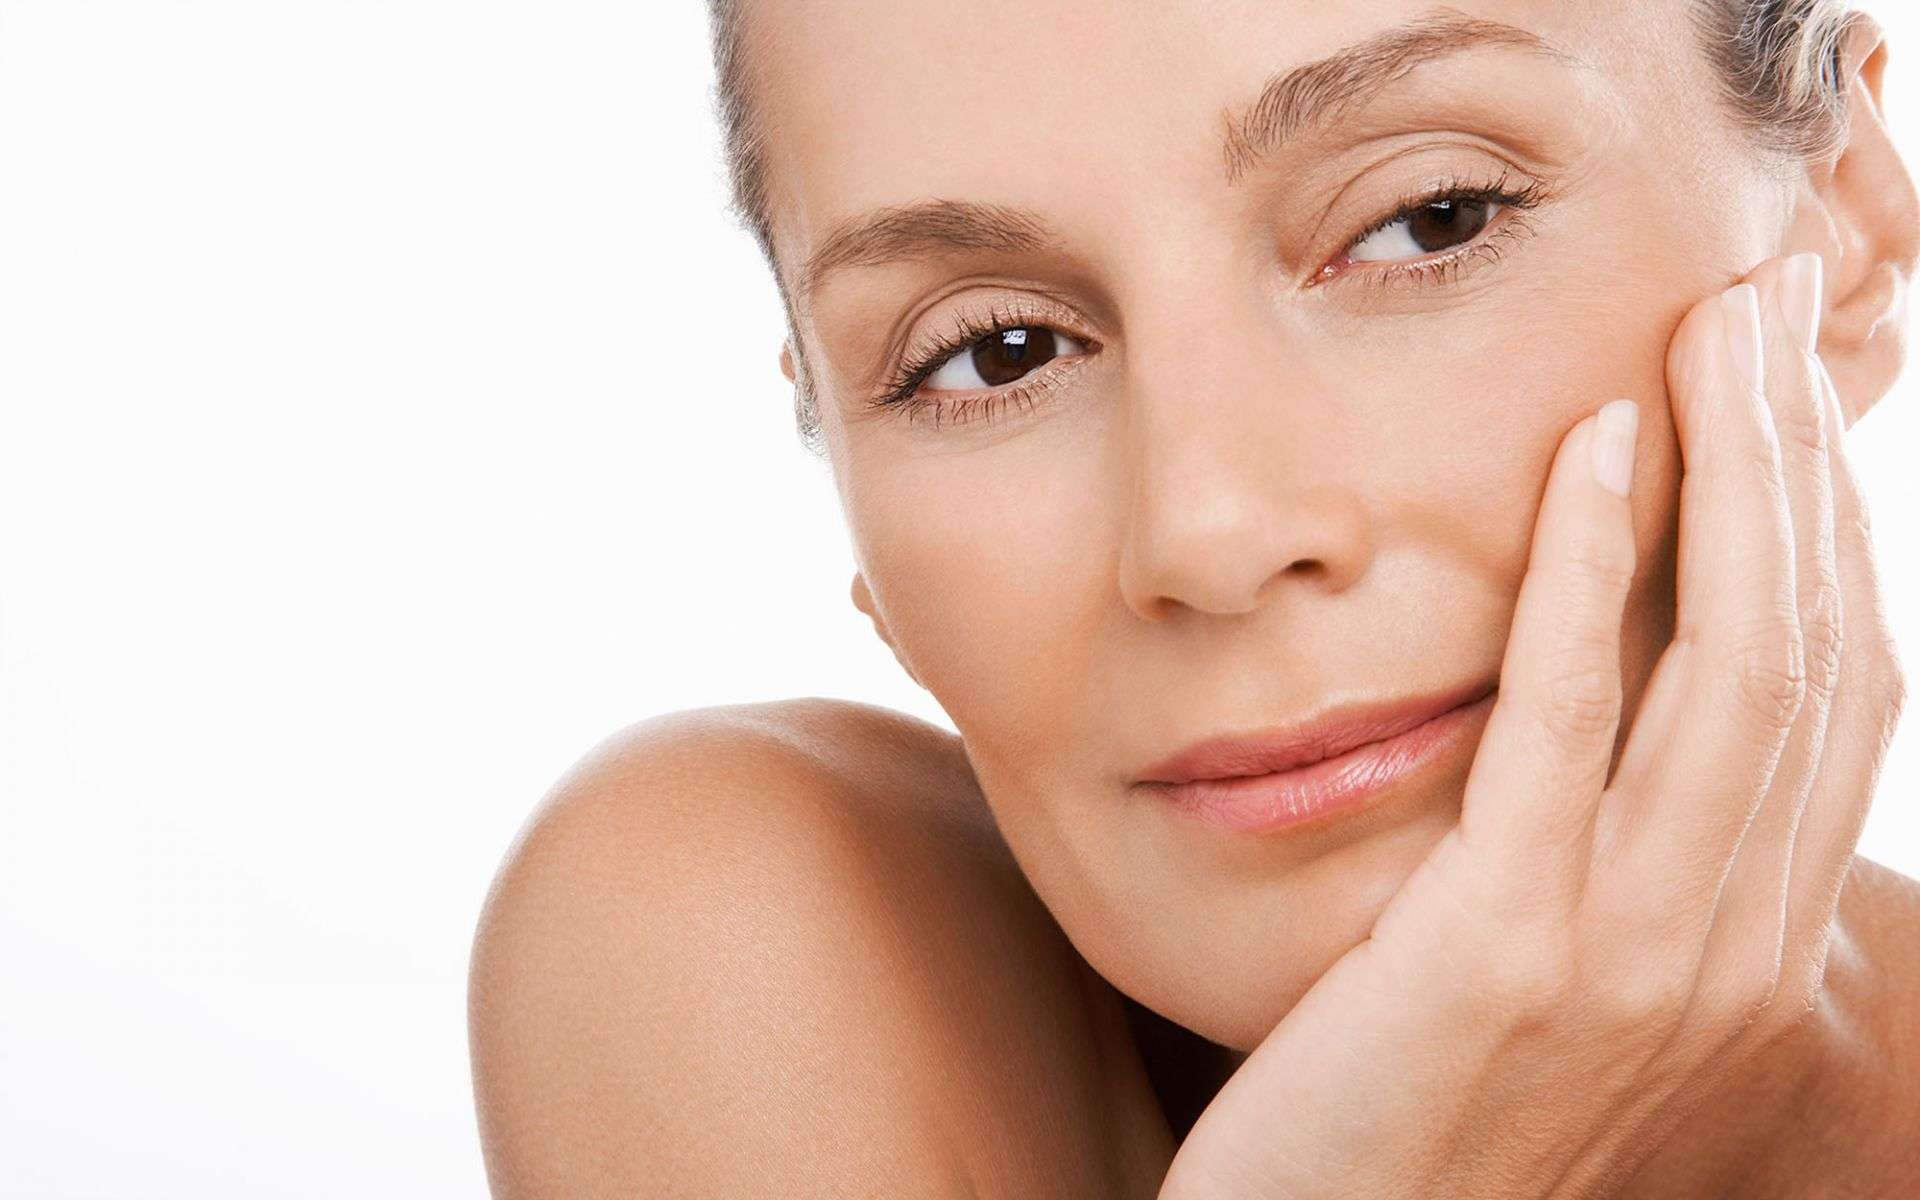 Choosing the Best Anti-Aging Treatment for You